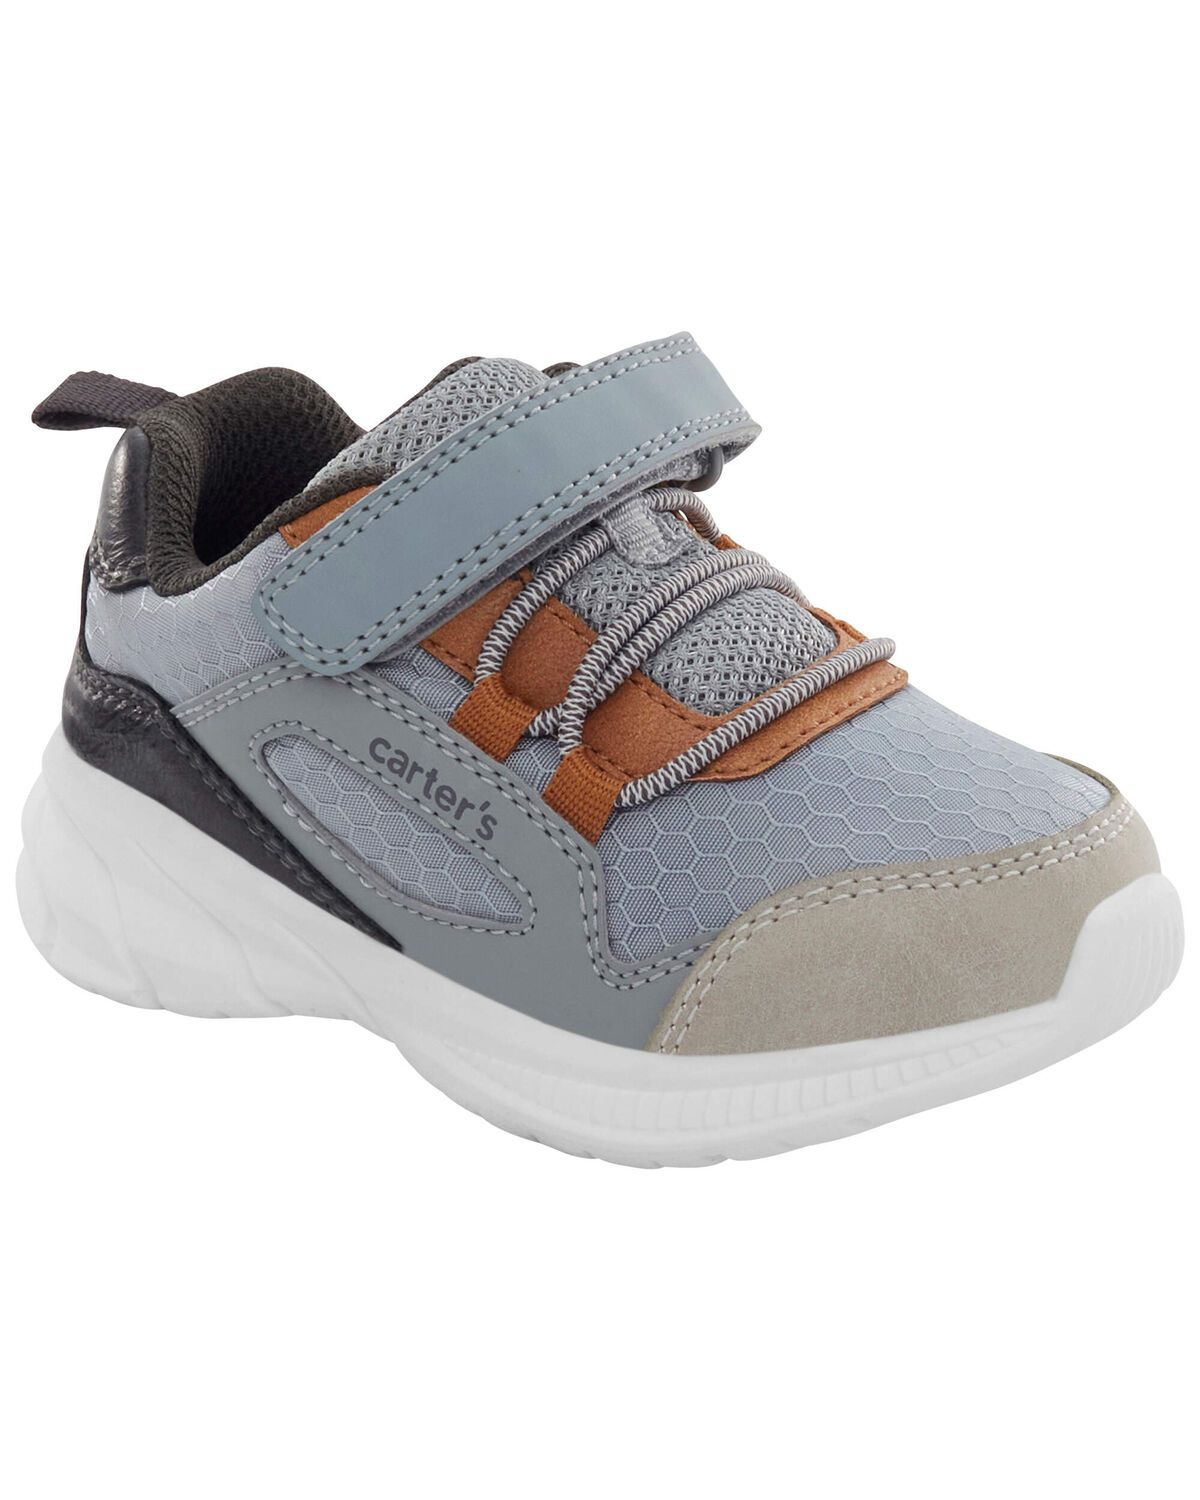 Toddler Athletic Sneakers | Carter's